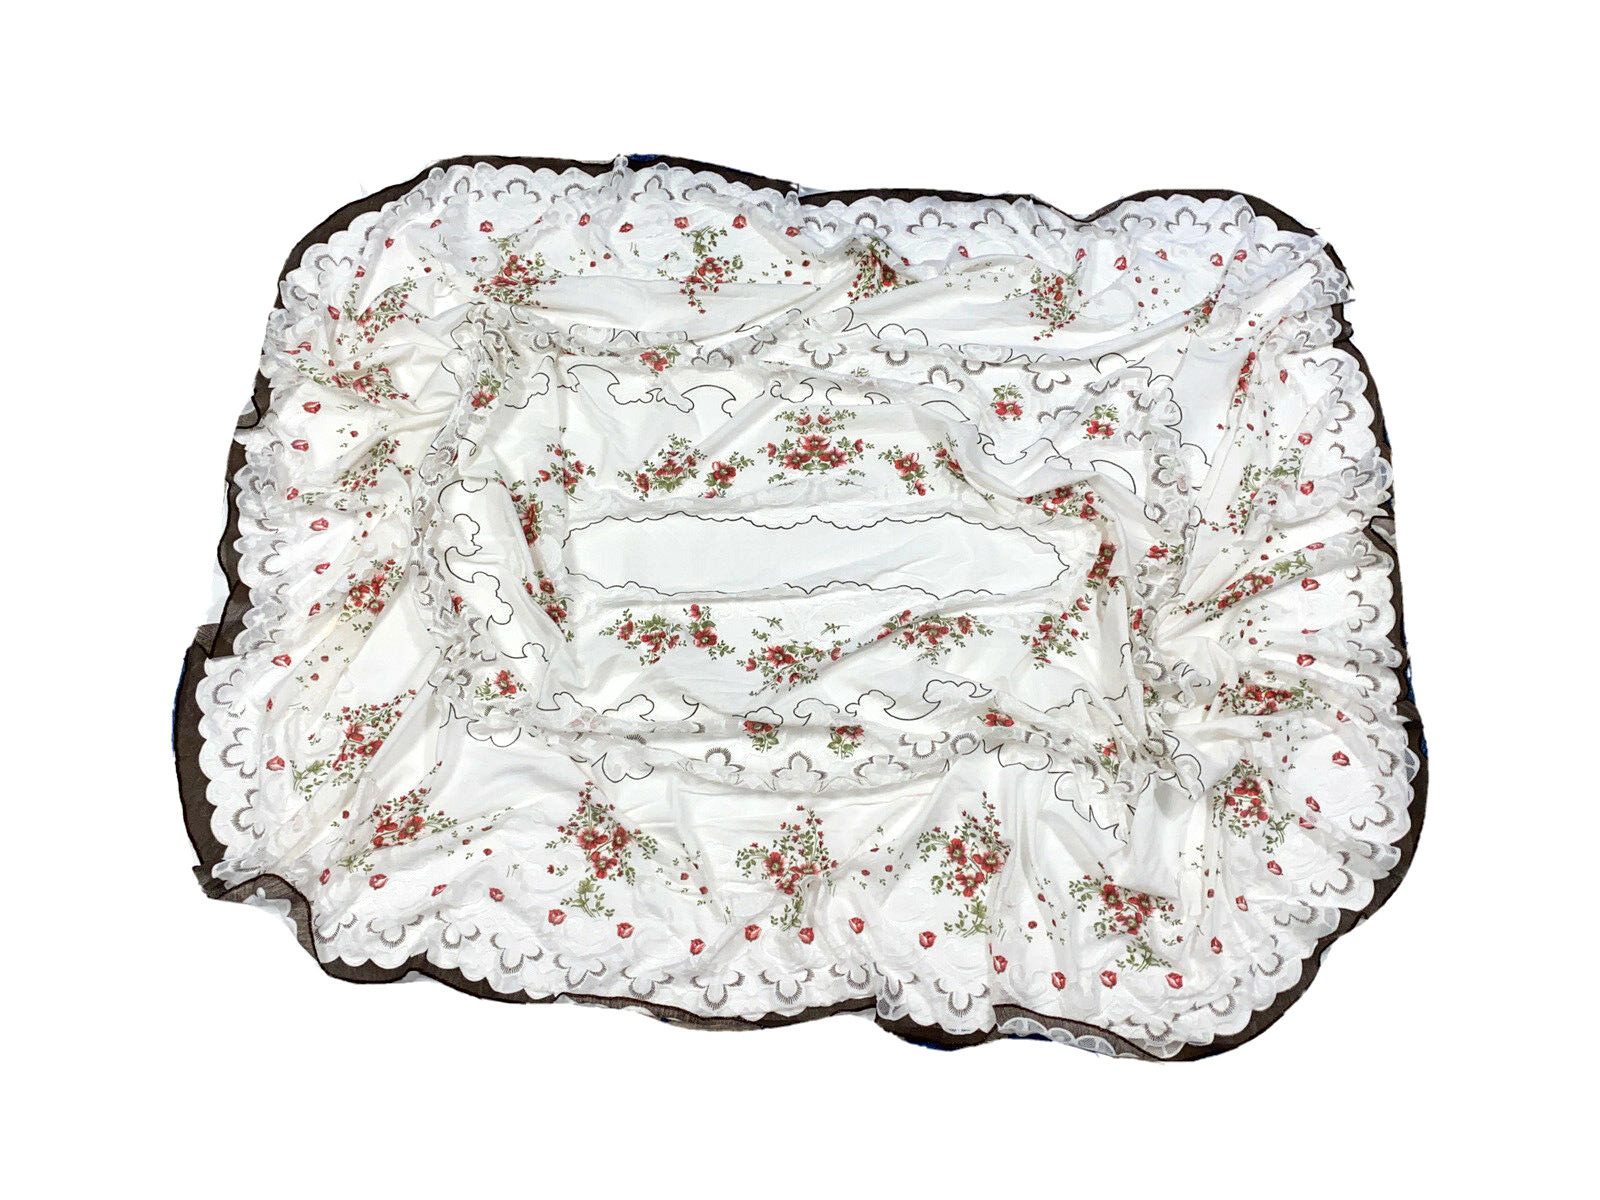 Vintage Tablecloth Delicate Lace Oval White Red Floral Sheer Large Doily 53 x 78